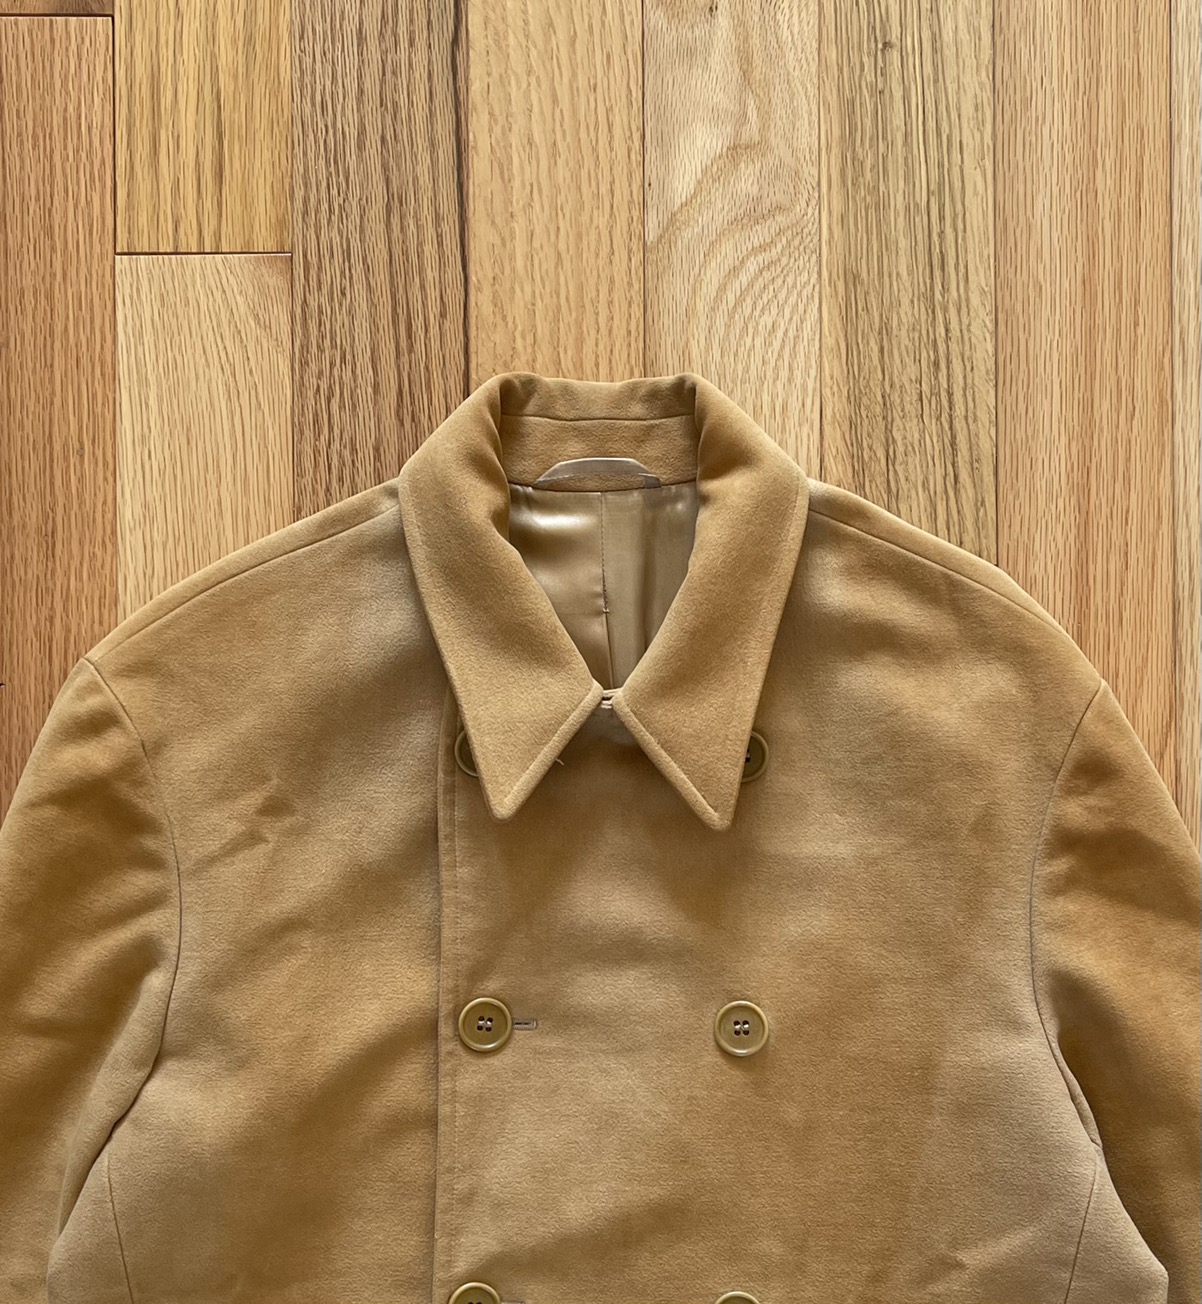 Early 2000s Helmut Lang Suede Double Breasted Peacoat - 4